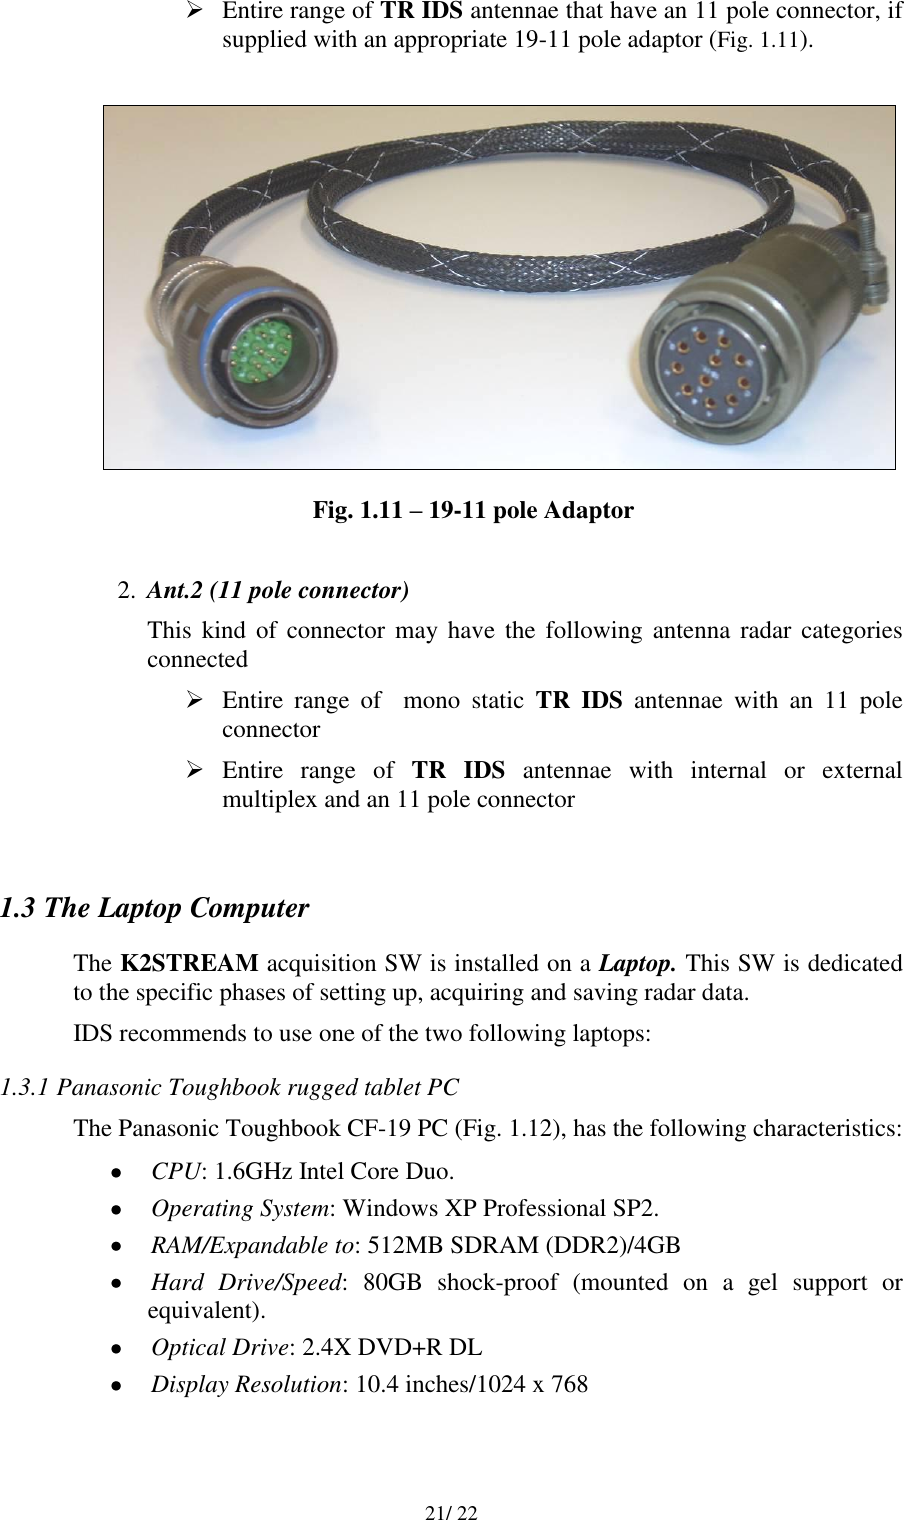   21/ 22  Entire range of TR IDS antennae that have an 11 pole connector, if supplied with an appropriate 19-11 pole adaptor (Fig. 1.11).   Fig. 1.11 – 19-11 pole Adaptor  2. Ant.2 (11 pole connector) This  kind  of connector may have  the following  antenna radar categories connected  Entire  range  of    mono  static  TR  IDS  antennae  with  an  11  pole connector   Entire  range  of  TR  IDS  antennae  with  internal  or  external multiplex and an 11 pole connector   1.3 The Laptop Computer The K2STREAM acquisition SW is installed on a Laptop. This SW is dedicated to the specific phases of setting up, acquiring and saving radar data. IDS recommends to use one of the two following laptops: 1.3.1 Panasonic Toughbook rugged tablet PC The Panasonic Toughbook CF-19 PC (Fig. 1.12), has the following characteristics:  CPU: 1.6GHz Intel Core Duo.  Operating System: Windows XP Professional SP2.  RAM/Expandable to: 512MB SDRAM (DDR2)/4GB  Hard  Drive/Speed:  80GB  shock-proof  (mounted  on  a  gel  support  or equivalent).  Optical Drive: 2.4X DVD+R DL  Display Resolution: 10.4 inches/1024 x 768 